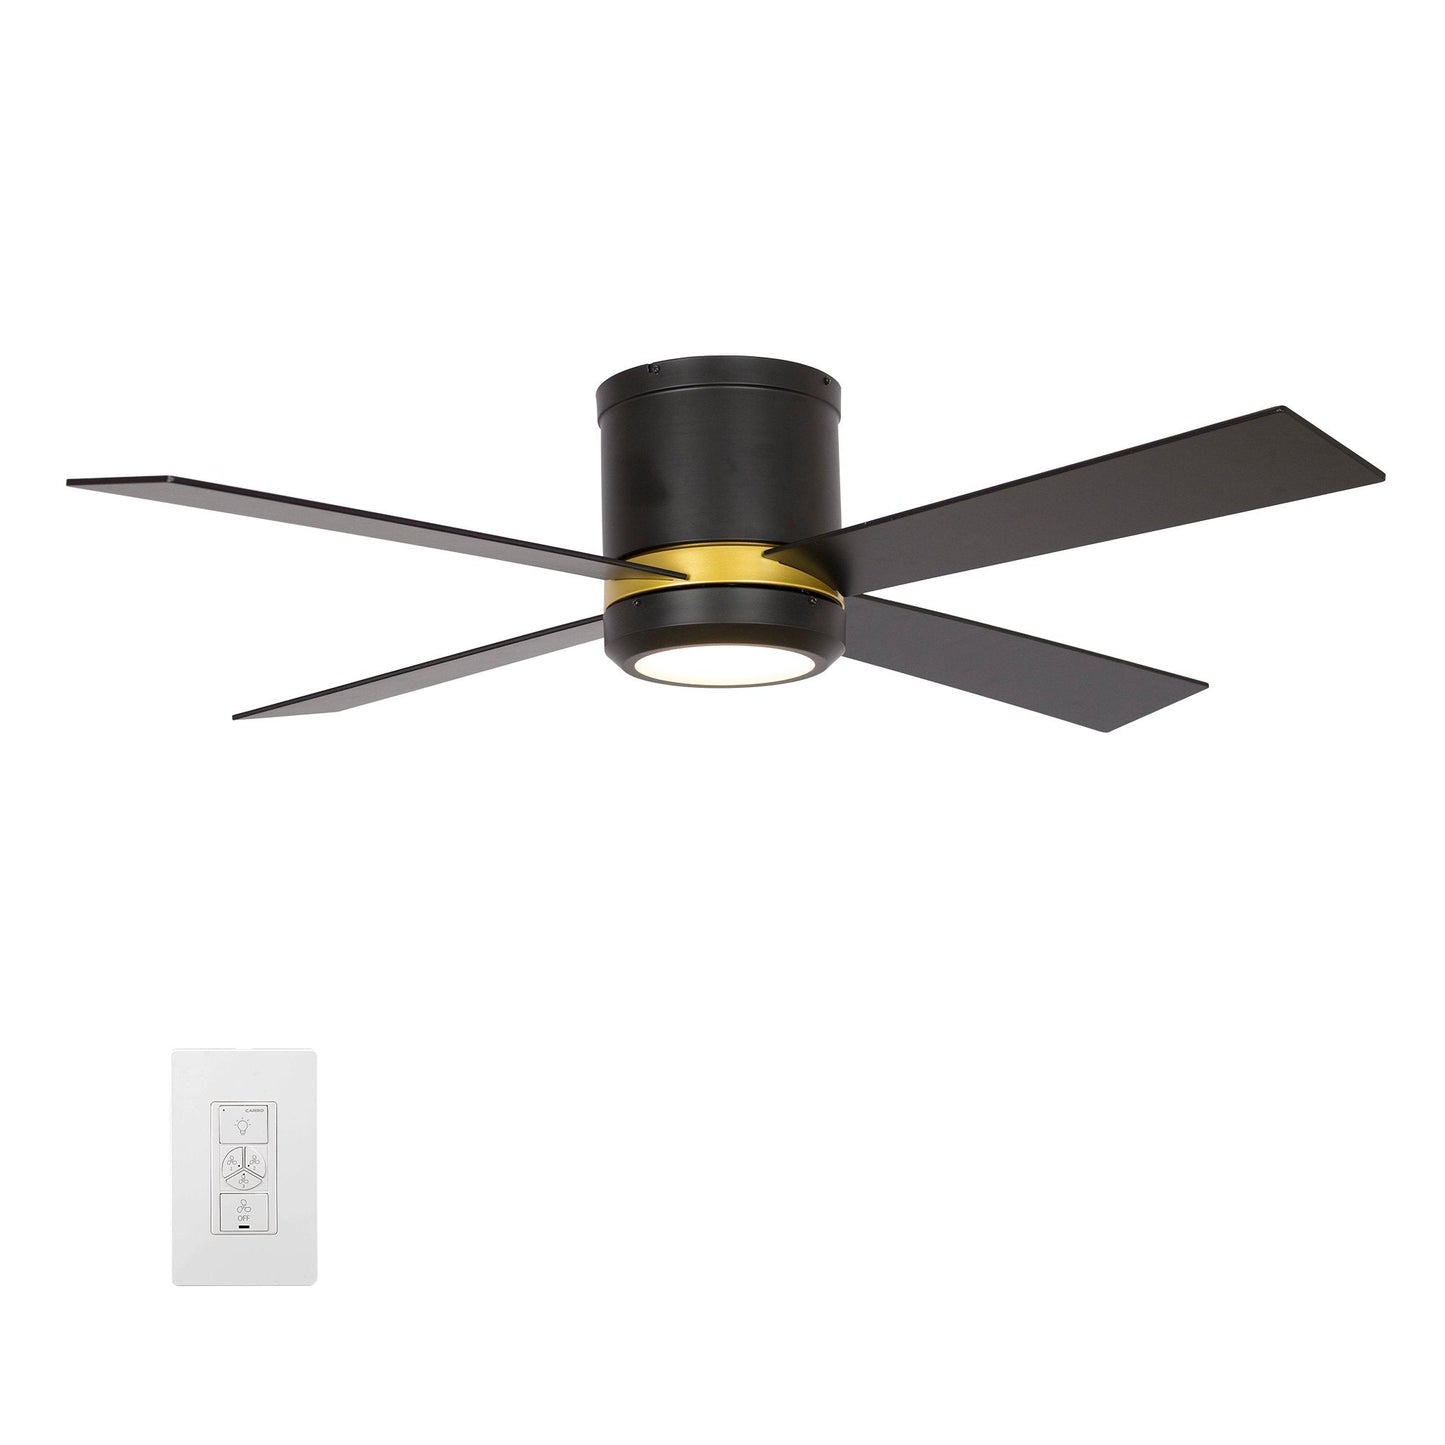 Arlo 52'' Best Smart Ceiling Fan with wall control, Light Kit Included, Works with Google Assistant and Amazon Alexa,Siri Shortcut